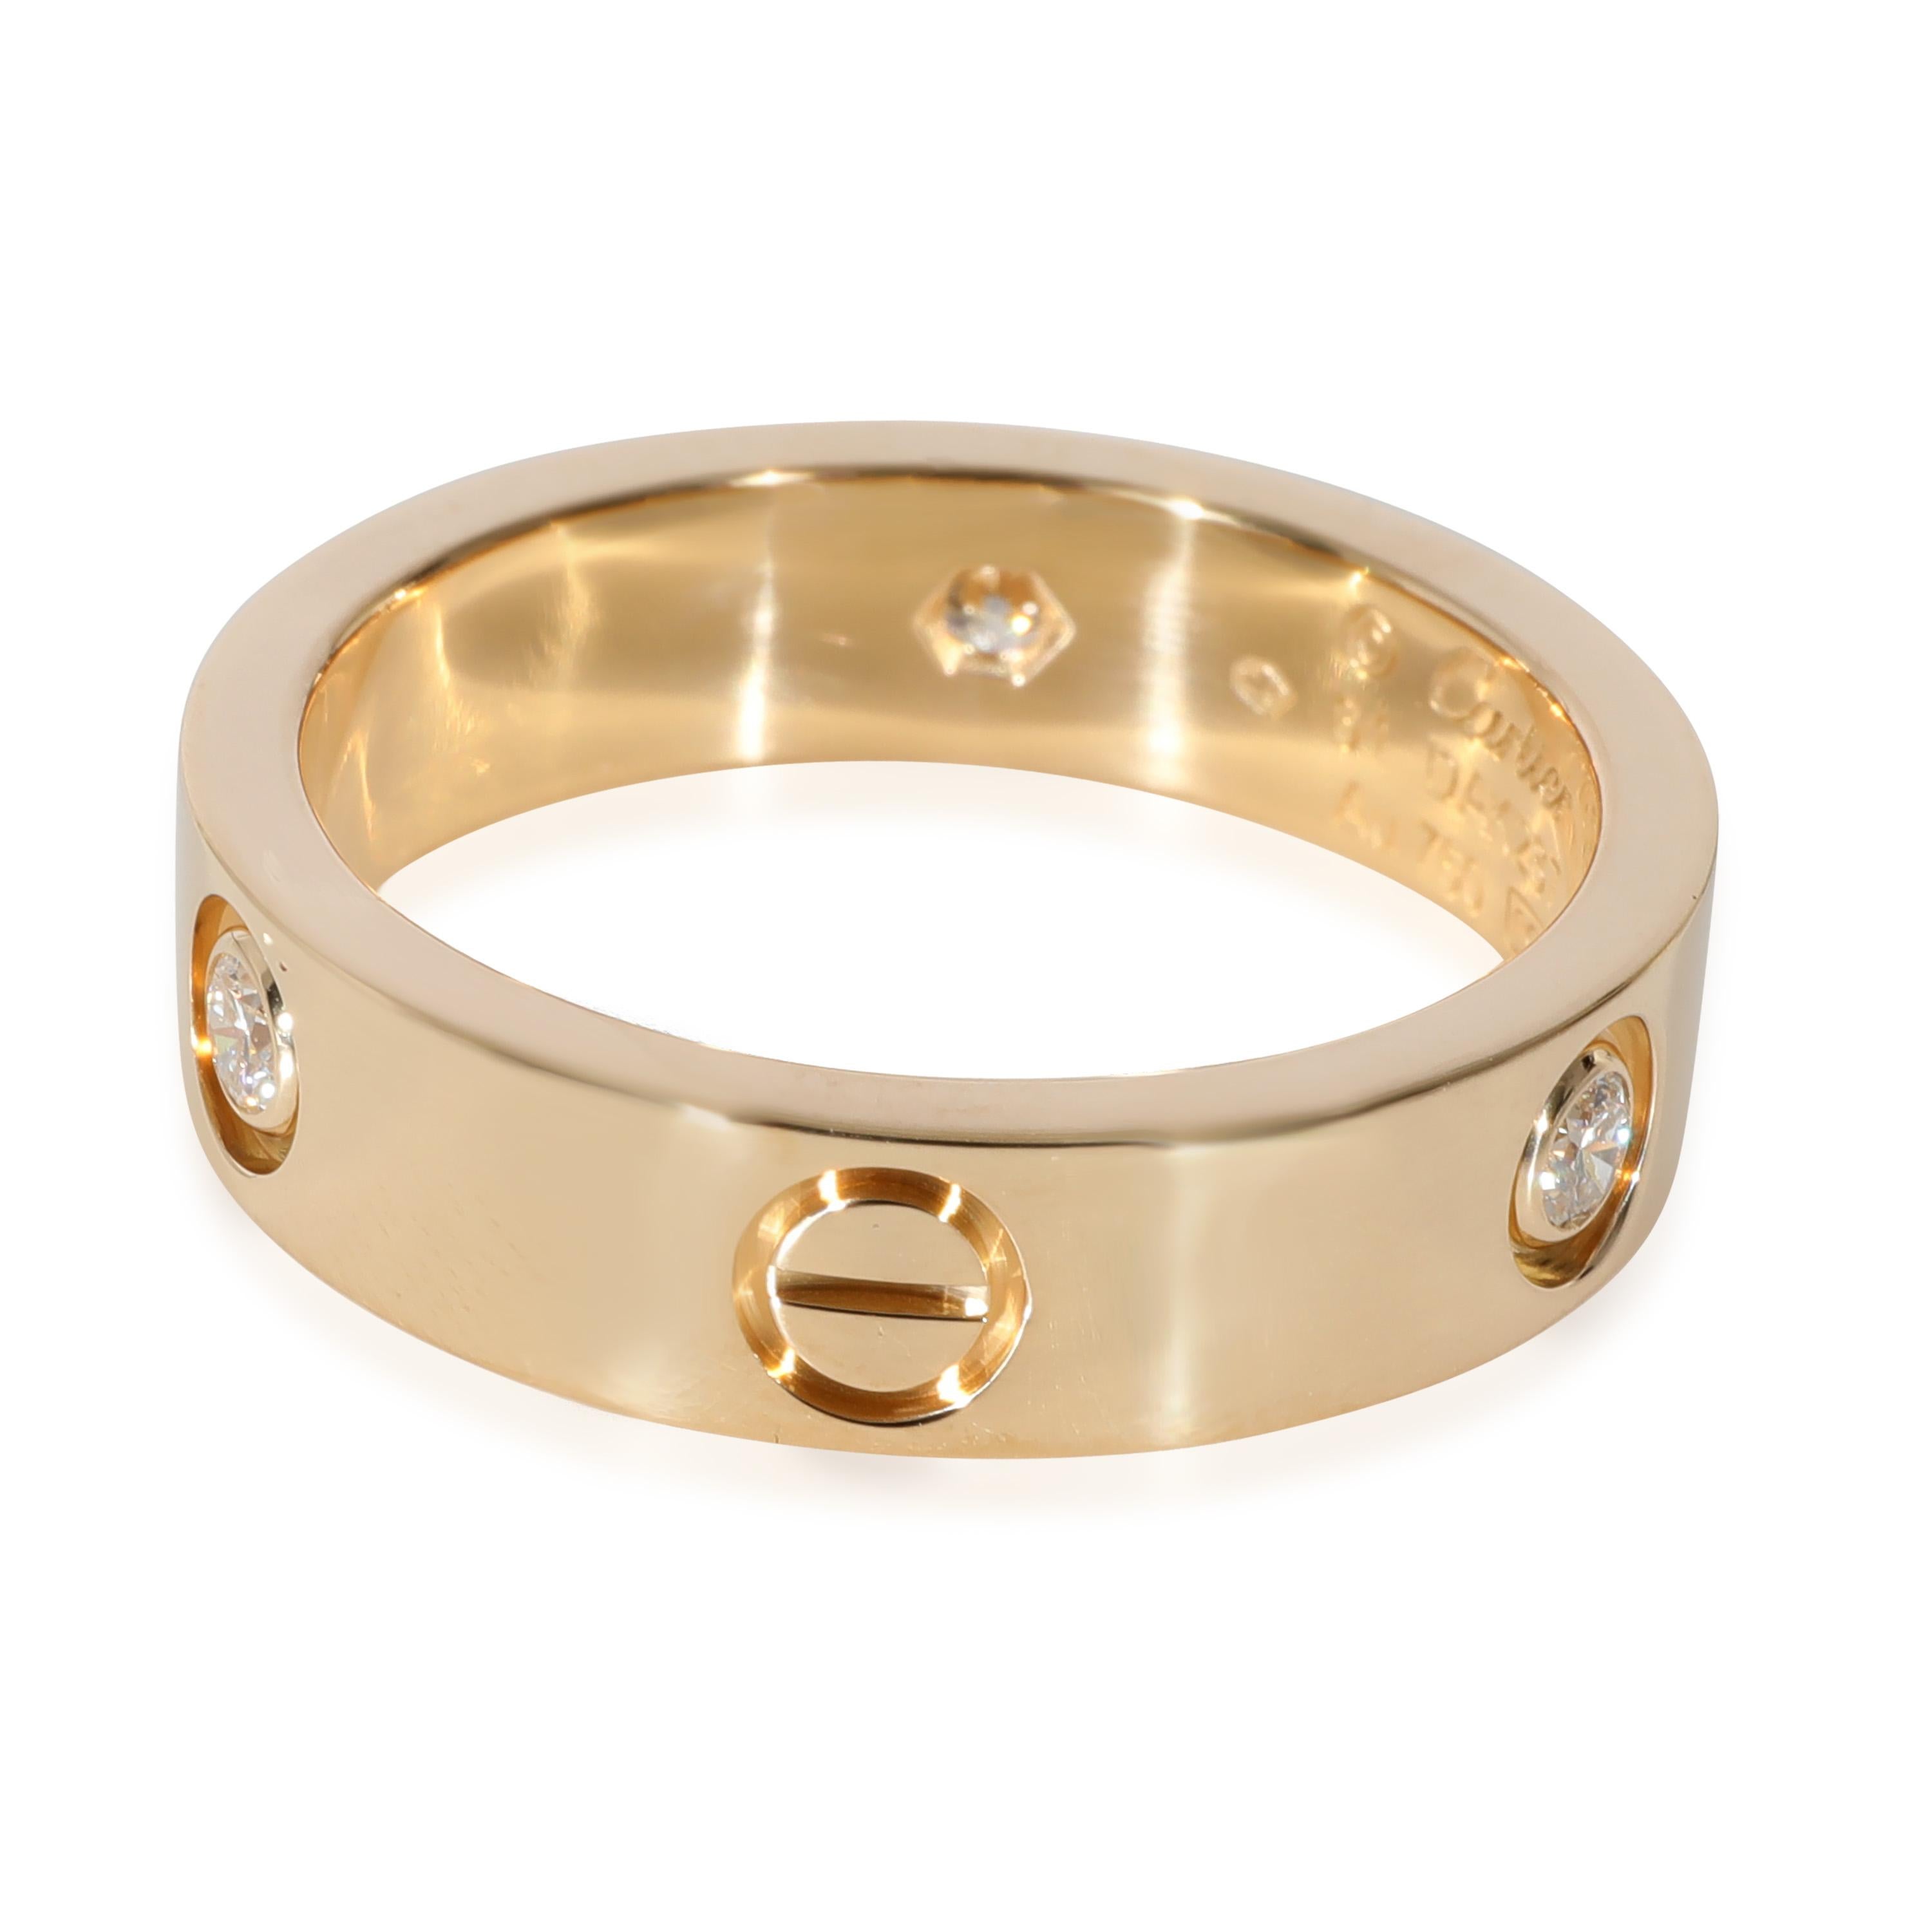 Cartier Love Diamond Ring in 18k Yellow Gold 0.22 CTW

PRIMARY DETAILS
SKU: 129372
Listing Title: Cartier Love Diamond Ring in 18k Yellow Gold 0.22 CTW
Condition Description: Cartier's Love collection is the epitome of iconic, from the recognizable